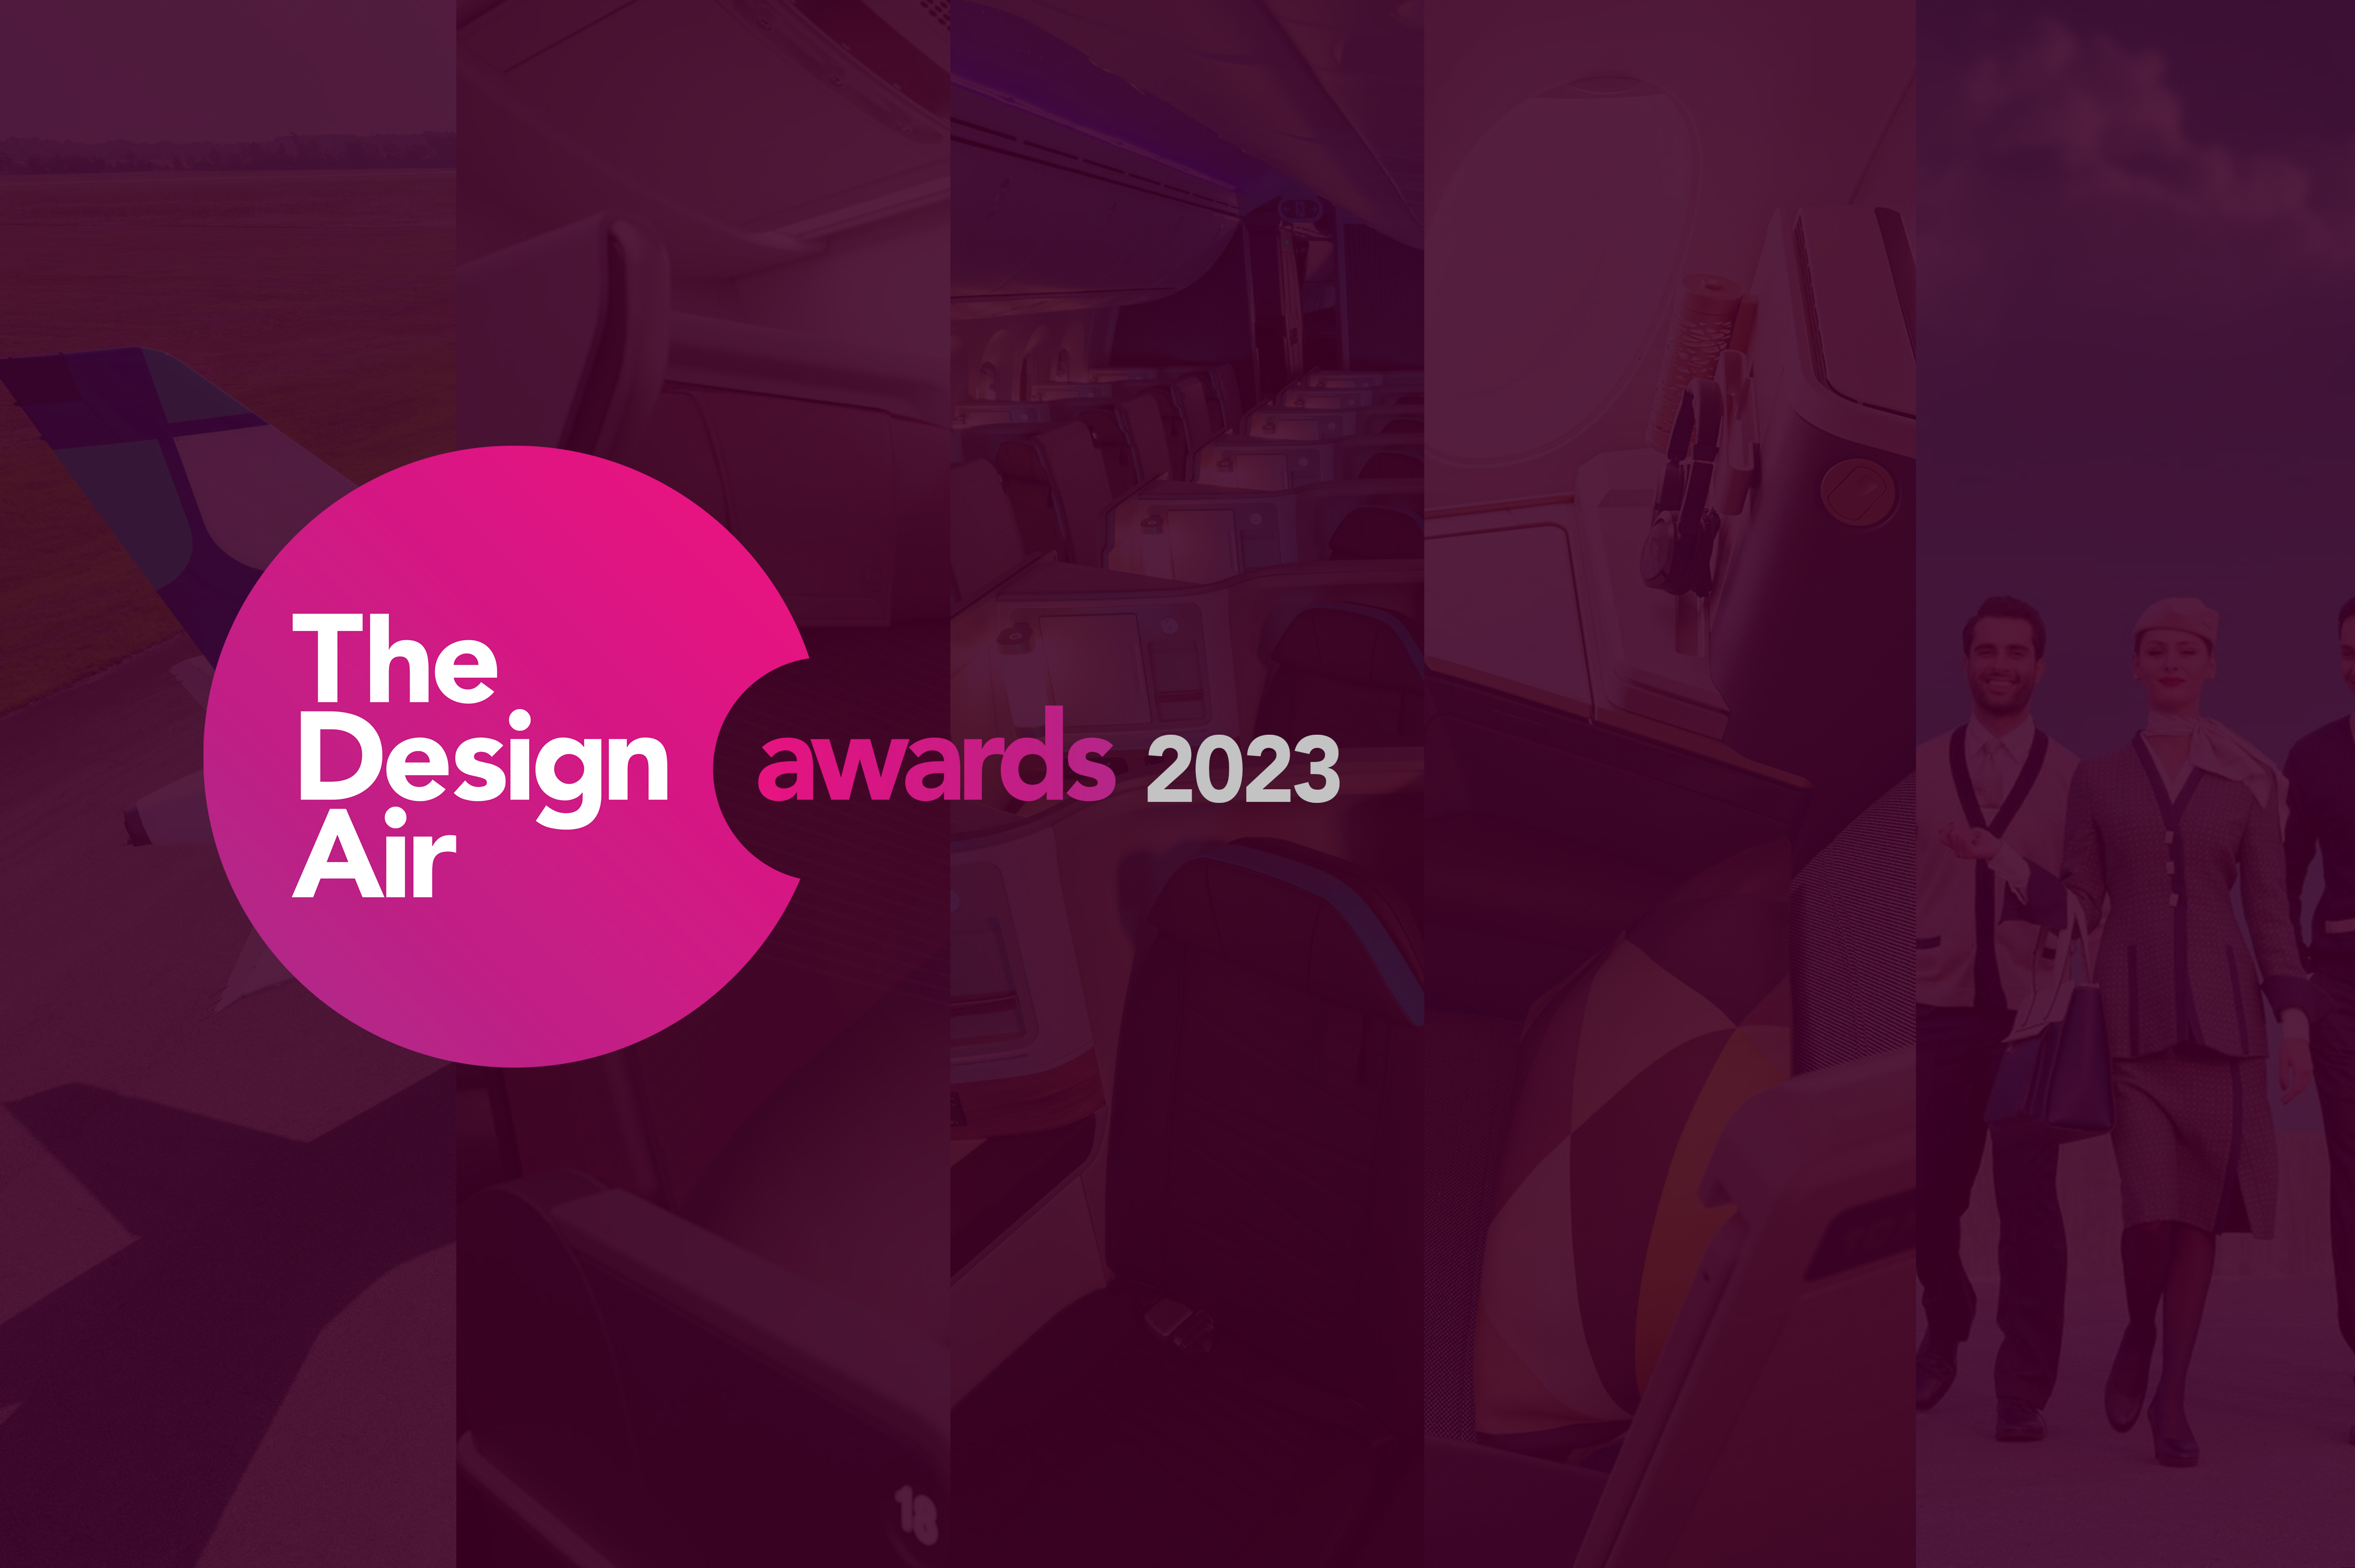 Congratulations to TheDesignAir Award Winners, 2023